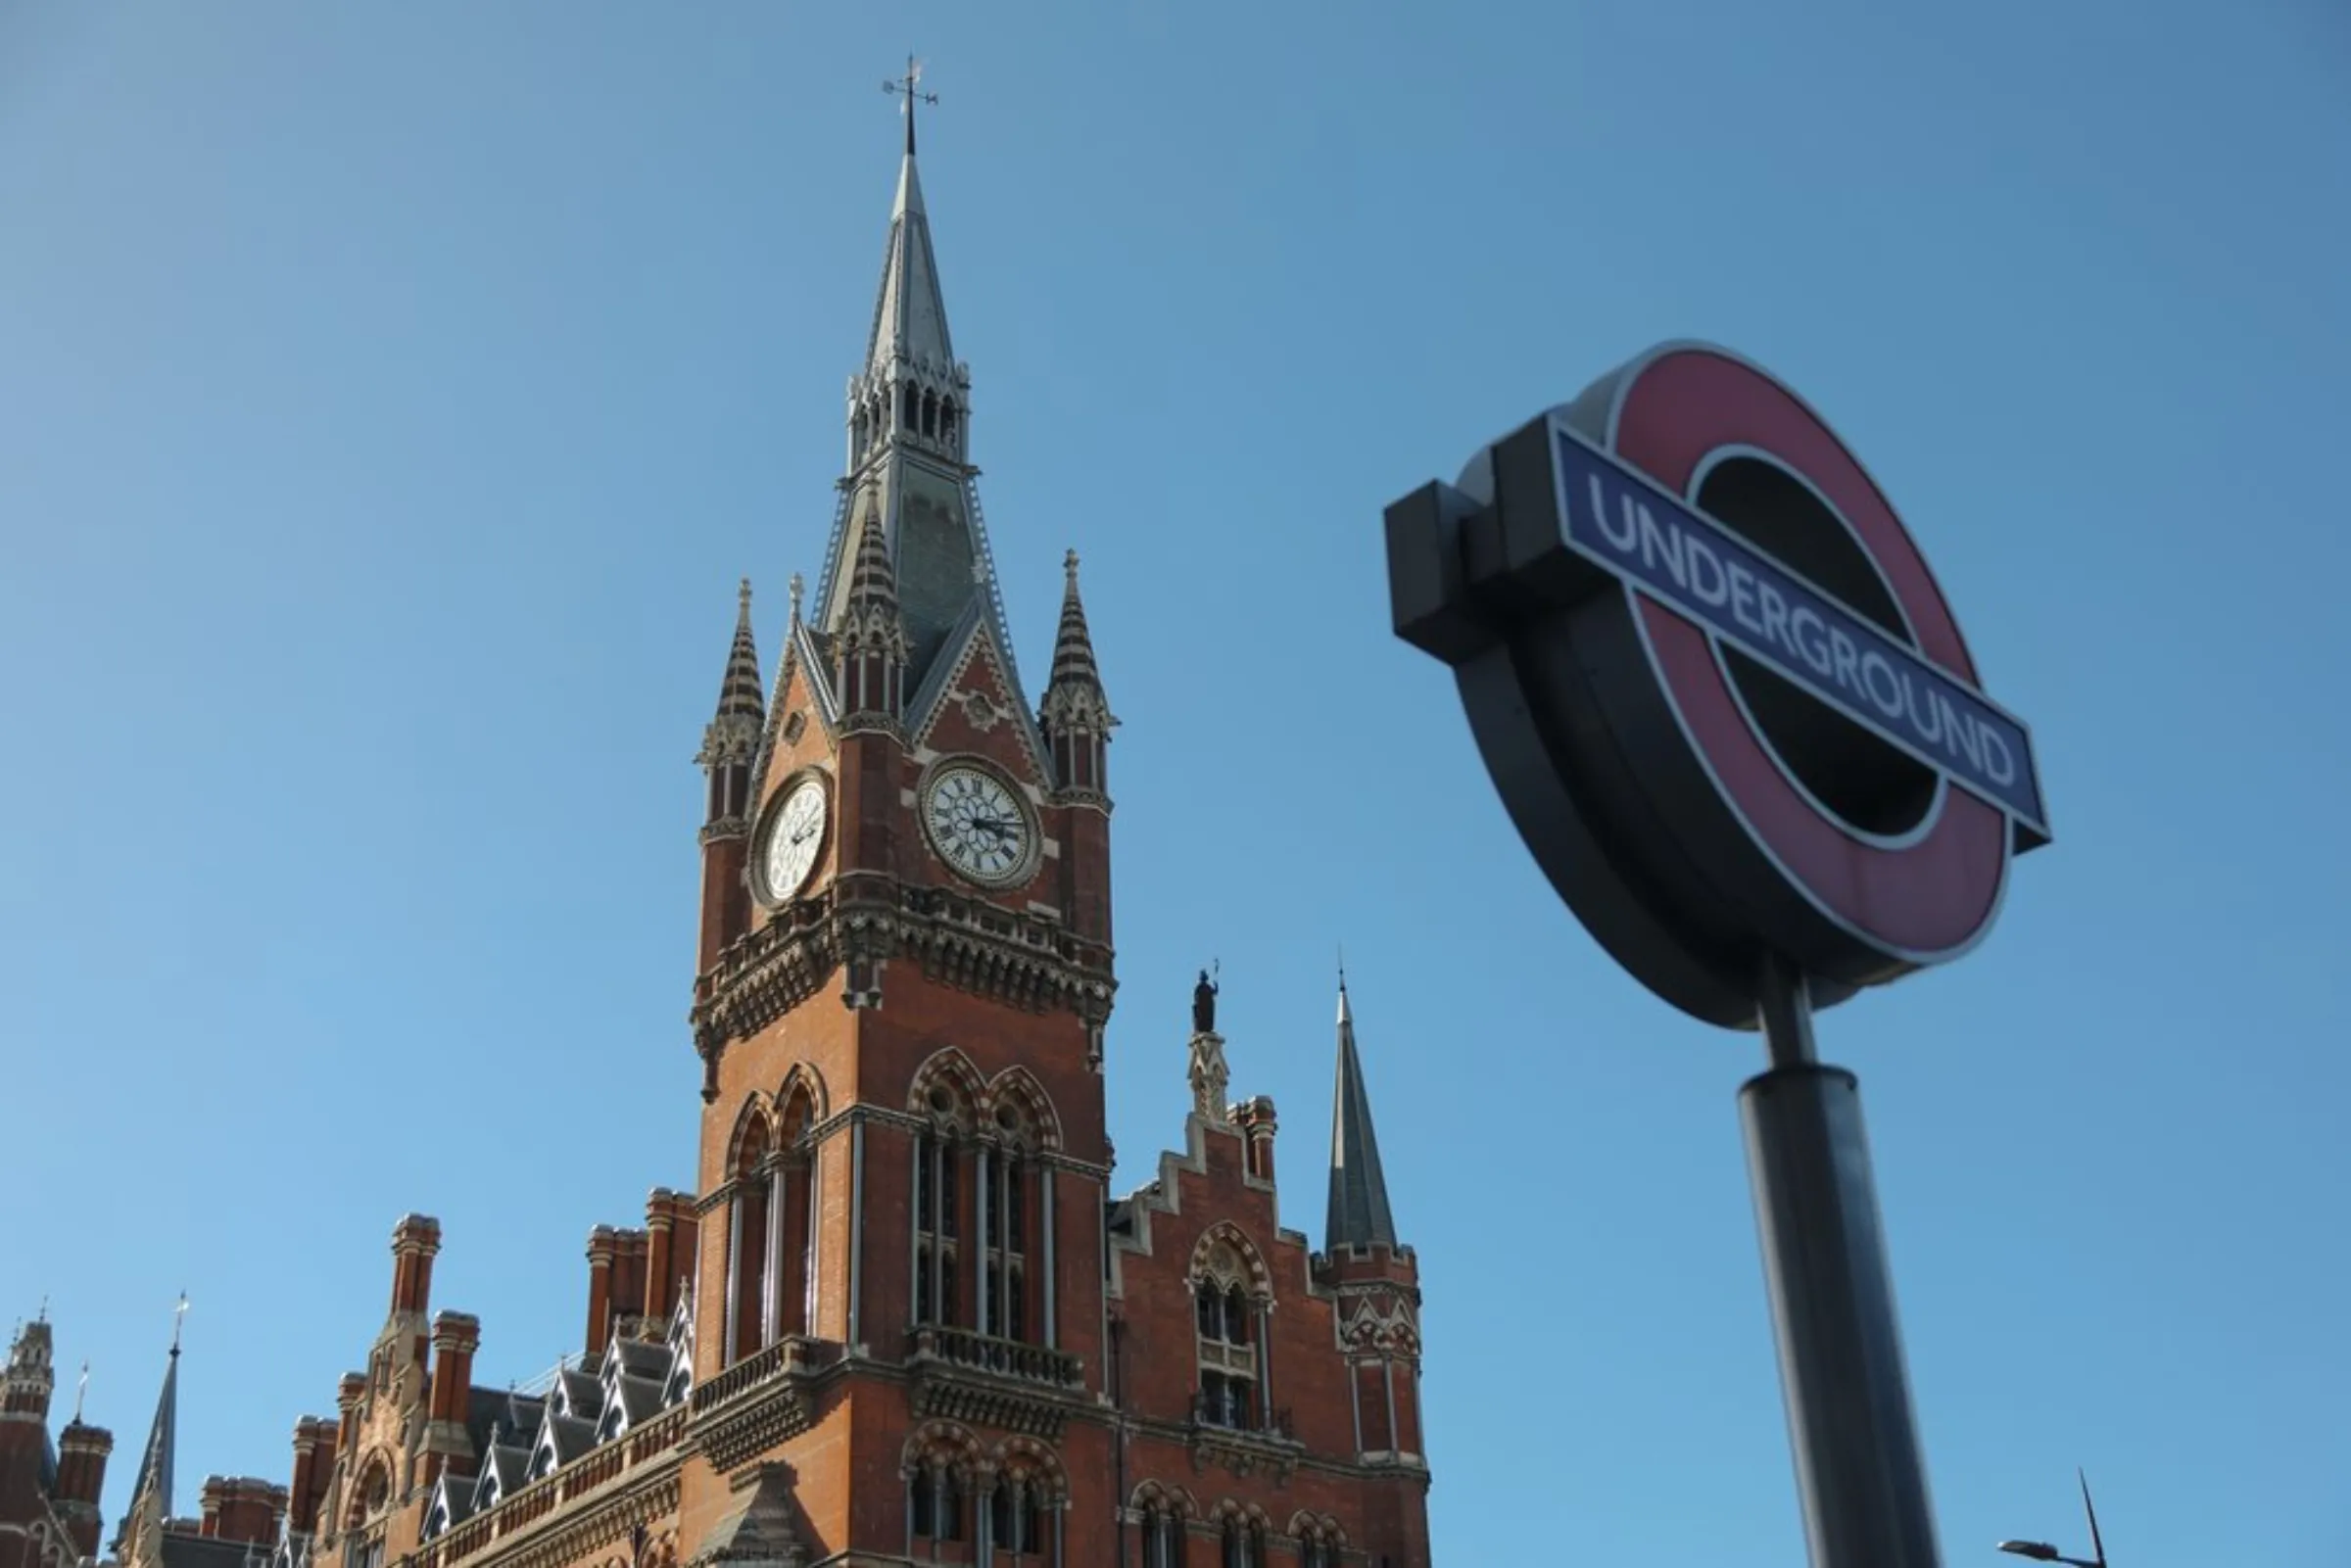 A spire towers above a sign for the King’s Cross Underground Station, one of nearly 60 “tube” stations researchers say are at growing risk of flooding in London, England, on October 21, 2021